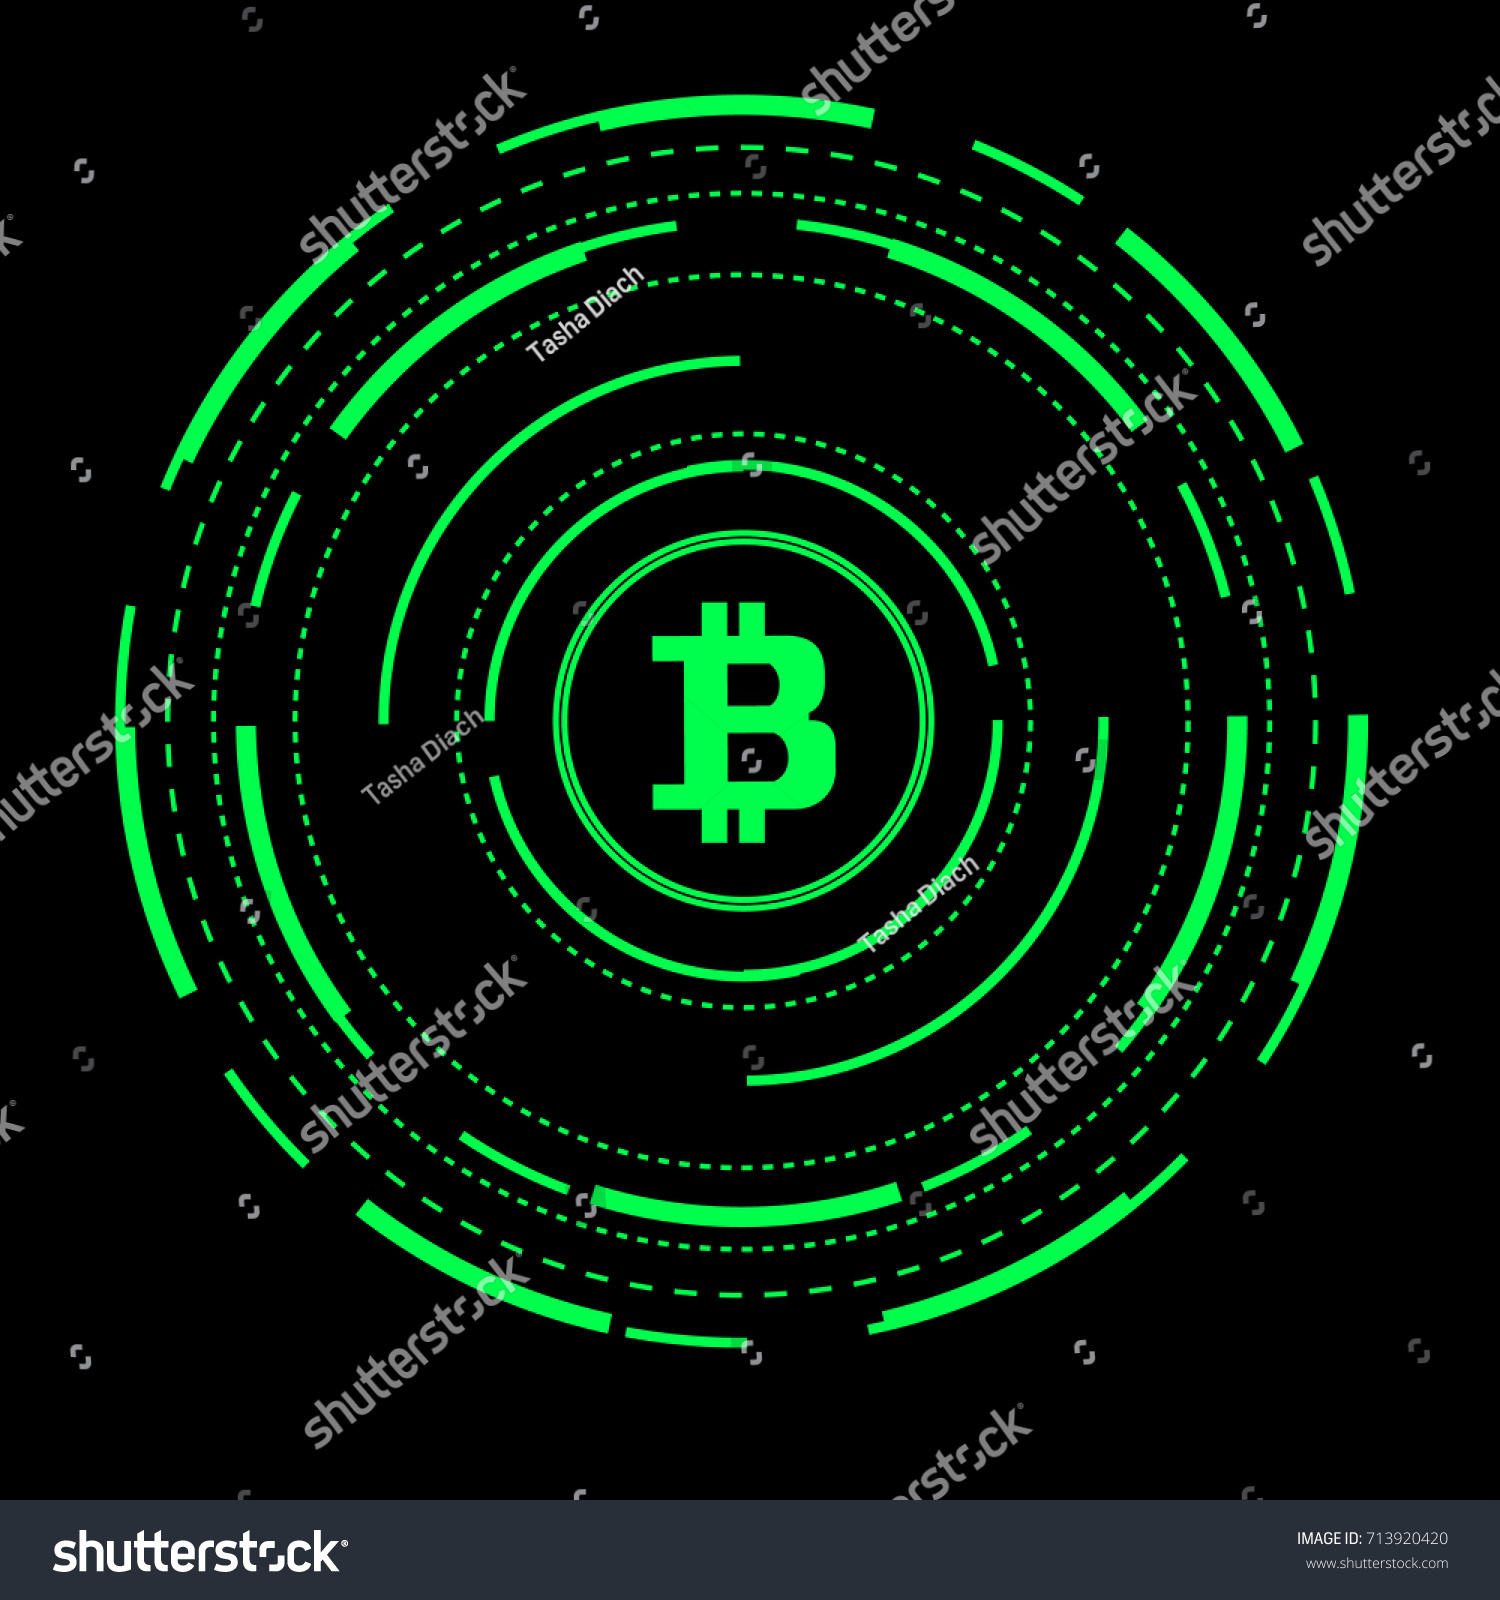 SVG of Abstract Circuit Board Bitcoin Technology Background Illustration. svg